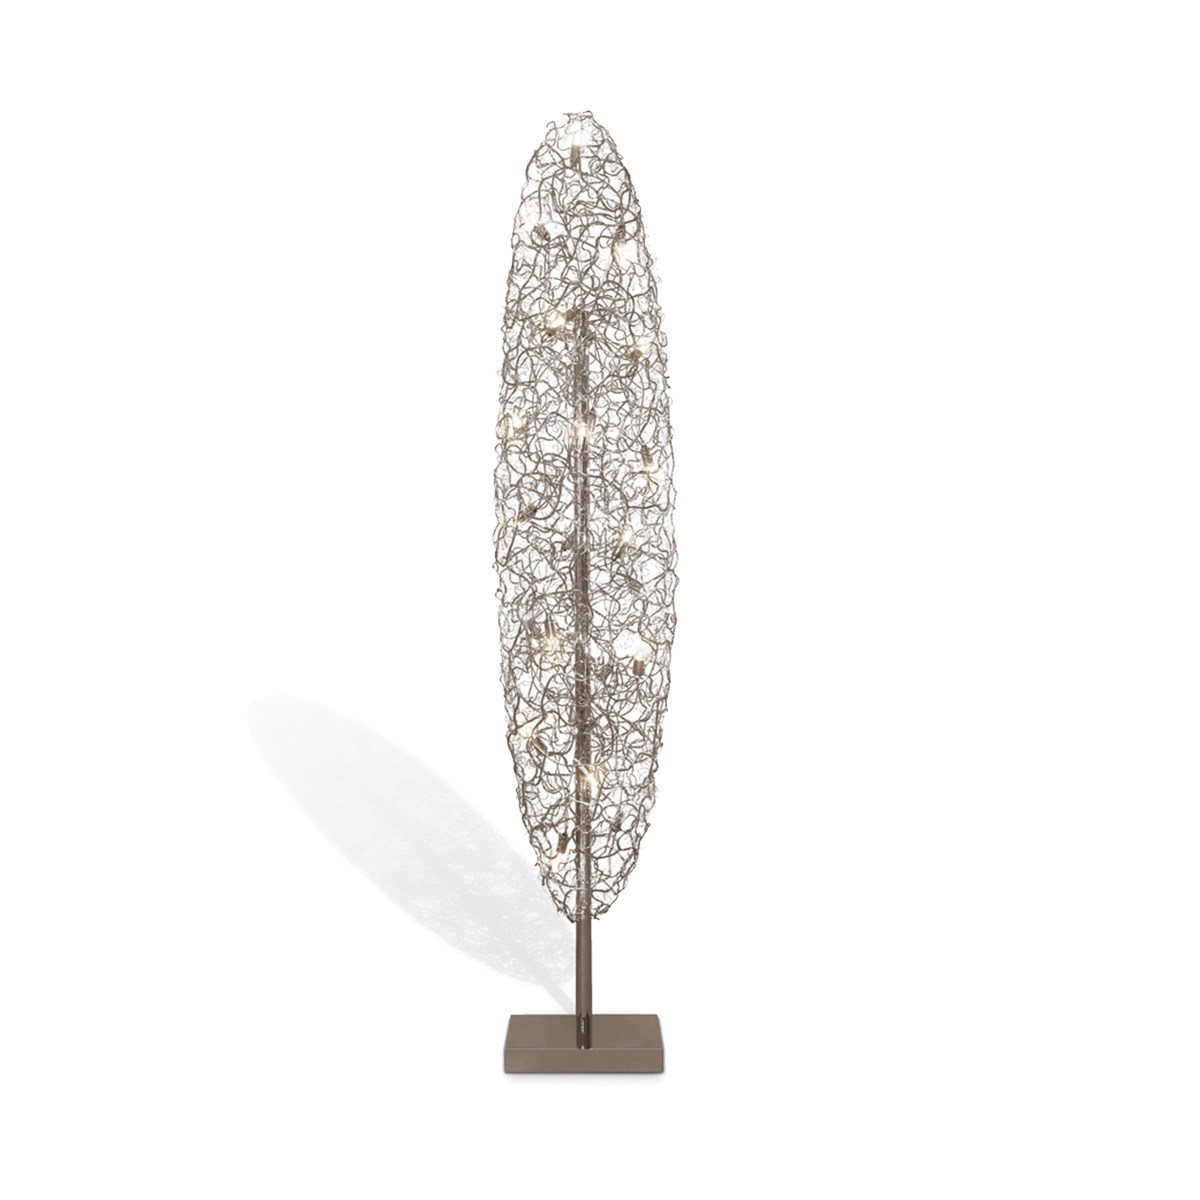 This240 Modern Floor Lamps Contemporary Lighting Crystal Waters Collection Cwf180nh Brandvanegmond